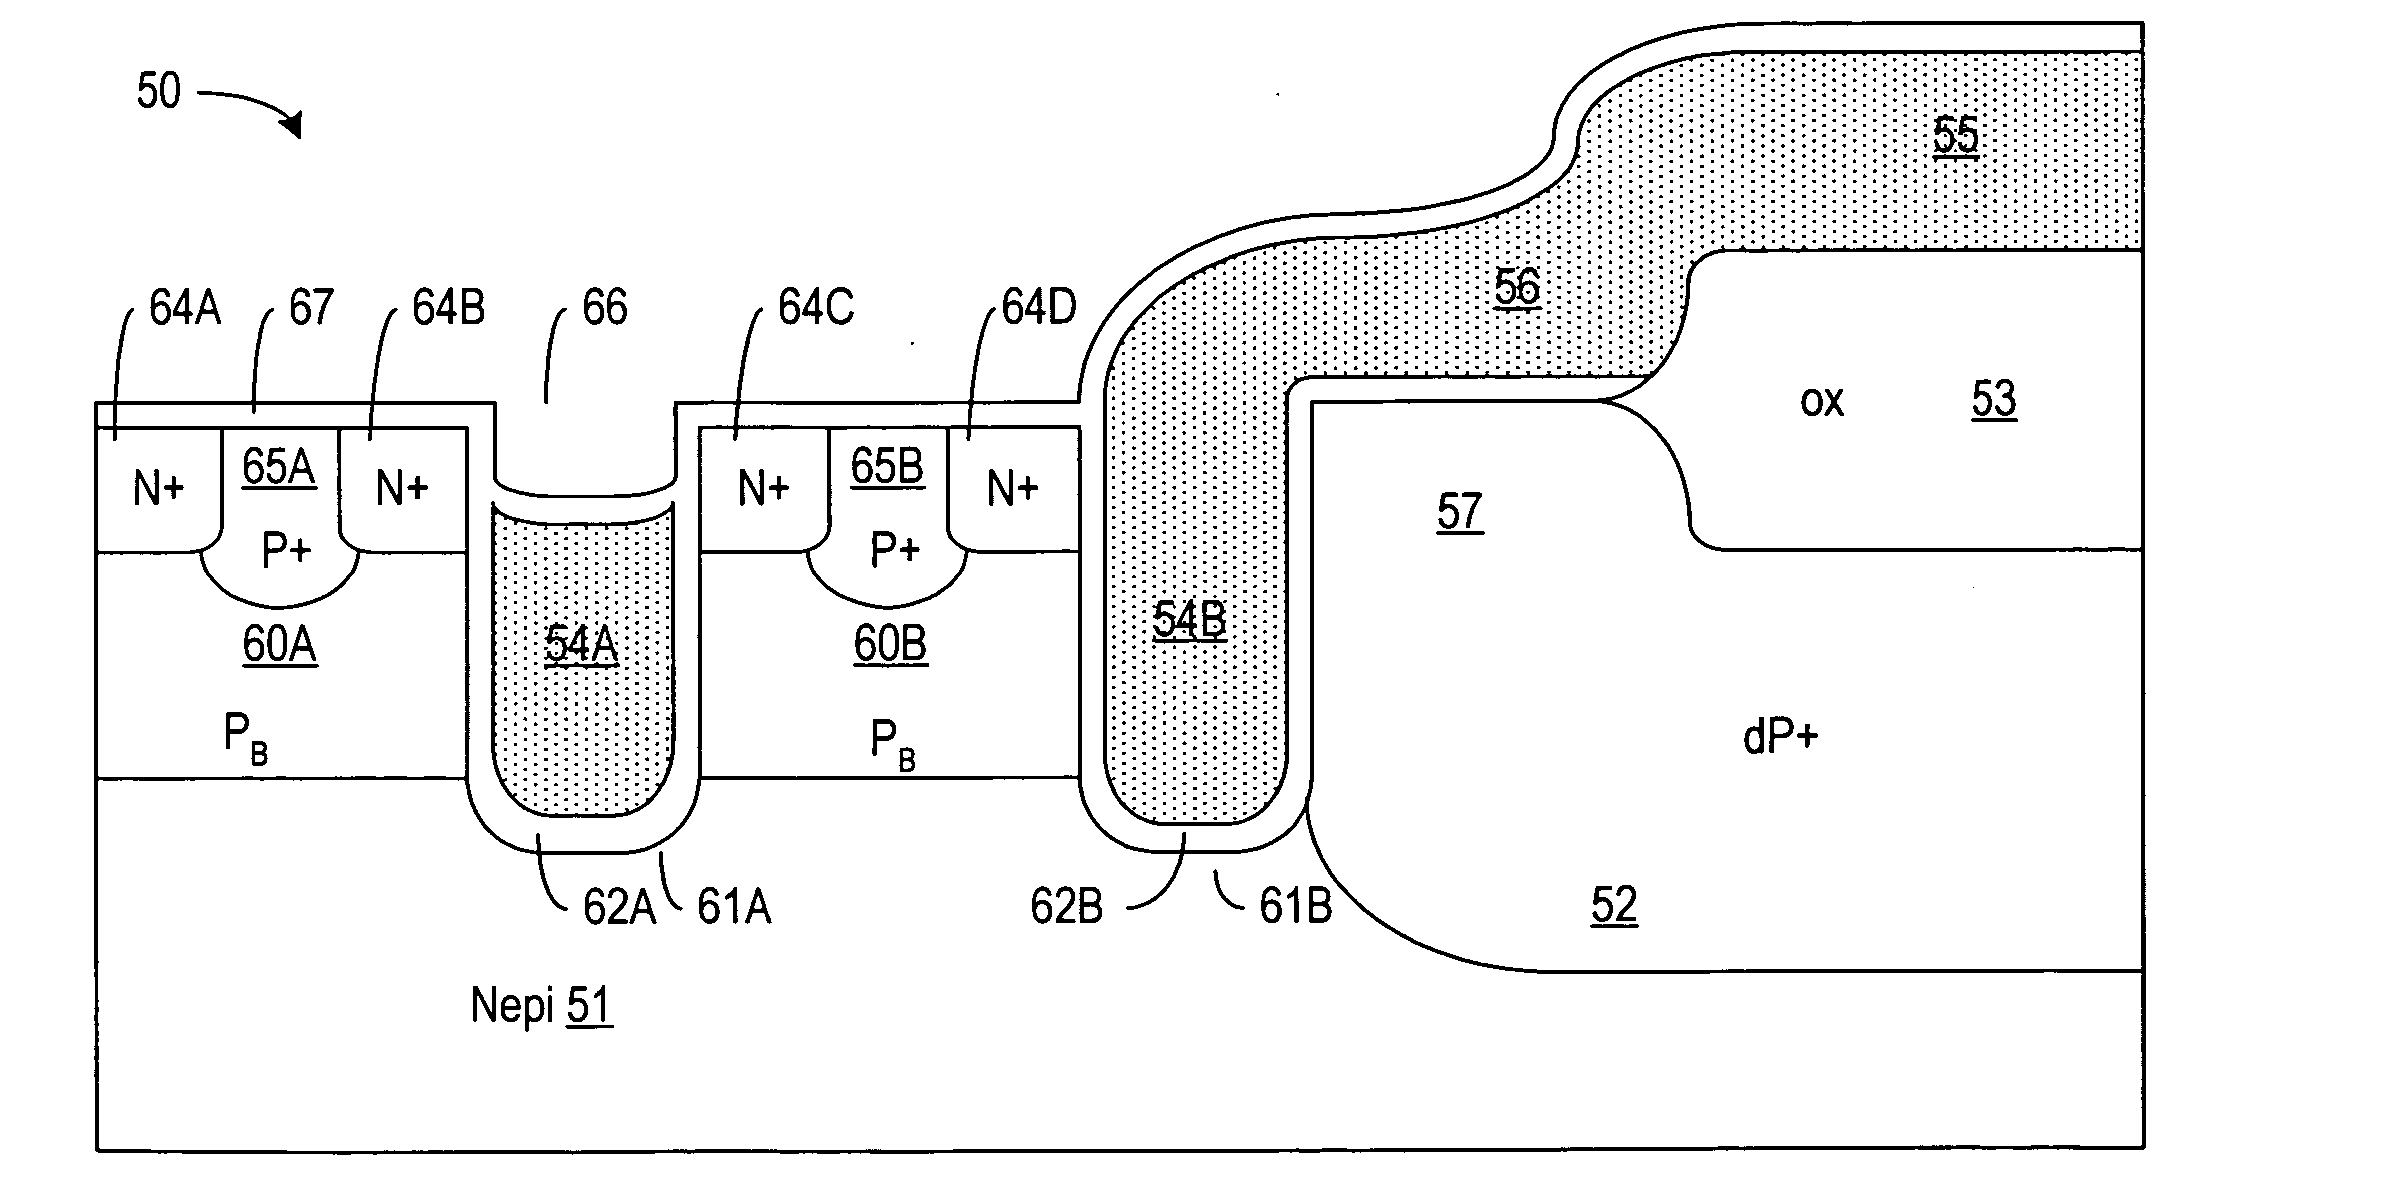 Trench power MOSFET with planarized gate bus